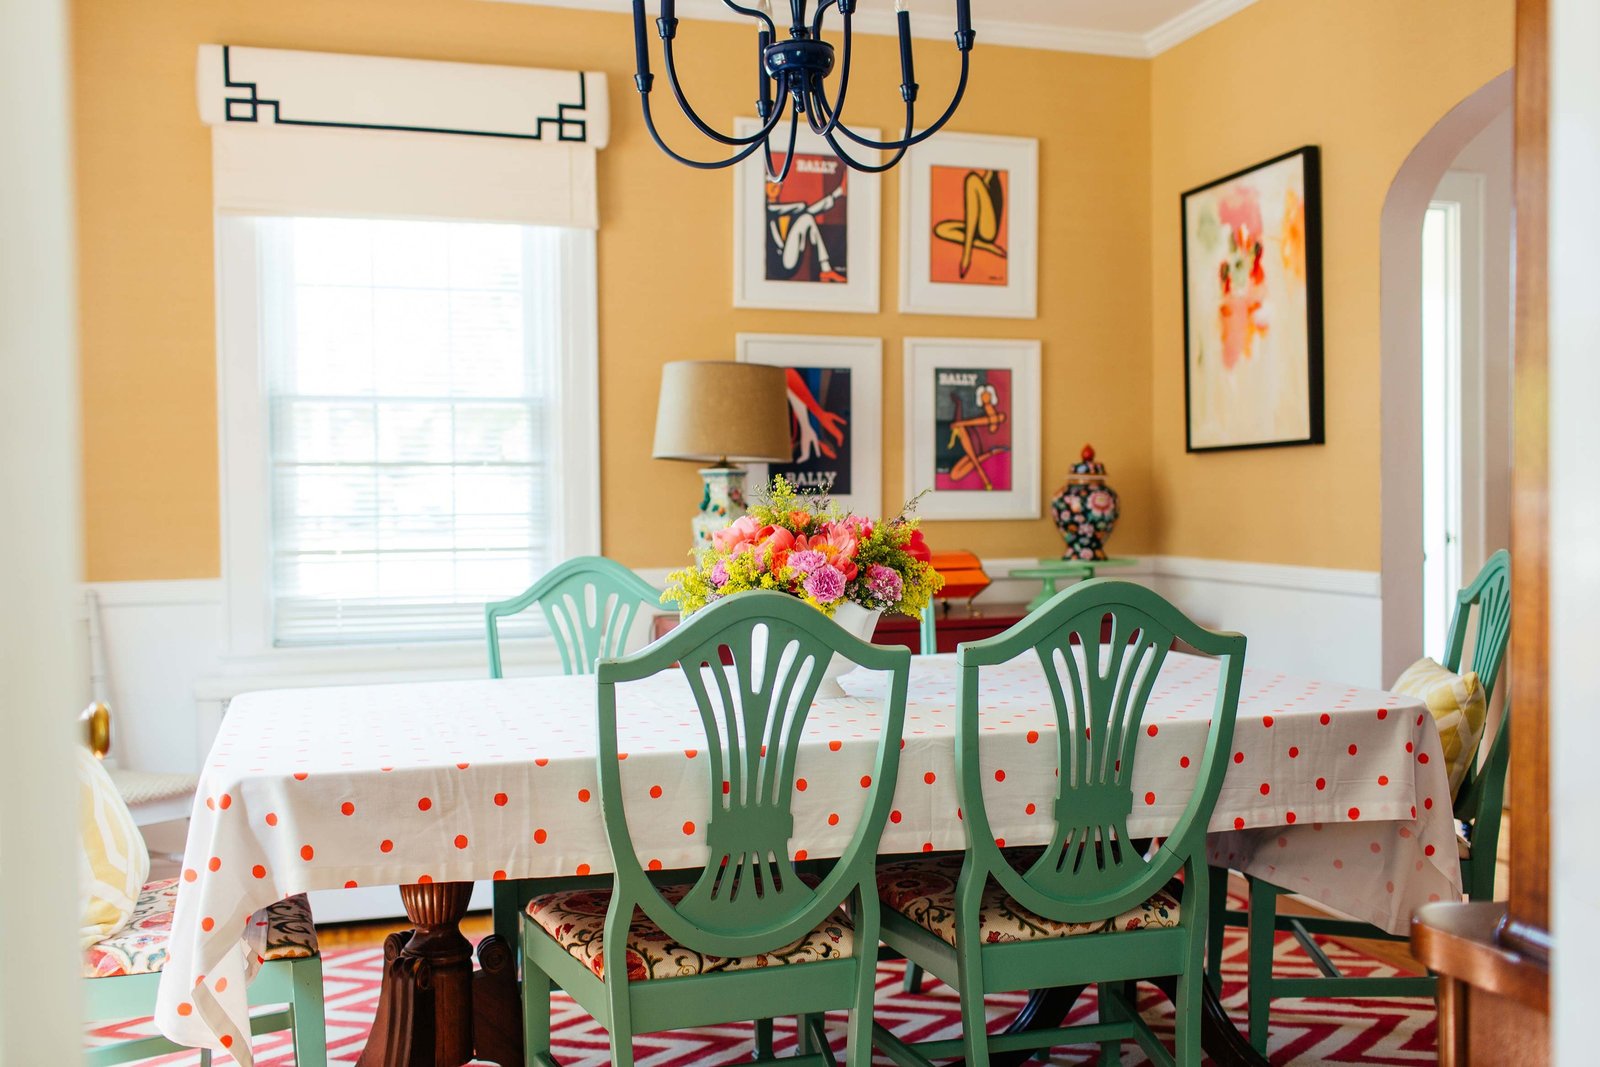 A yellow dining room with green chairs and chevron rug.